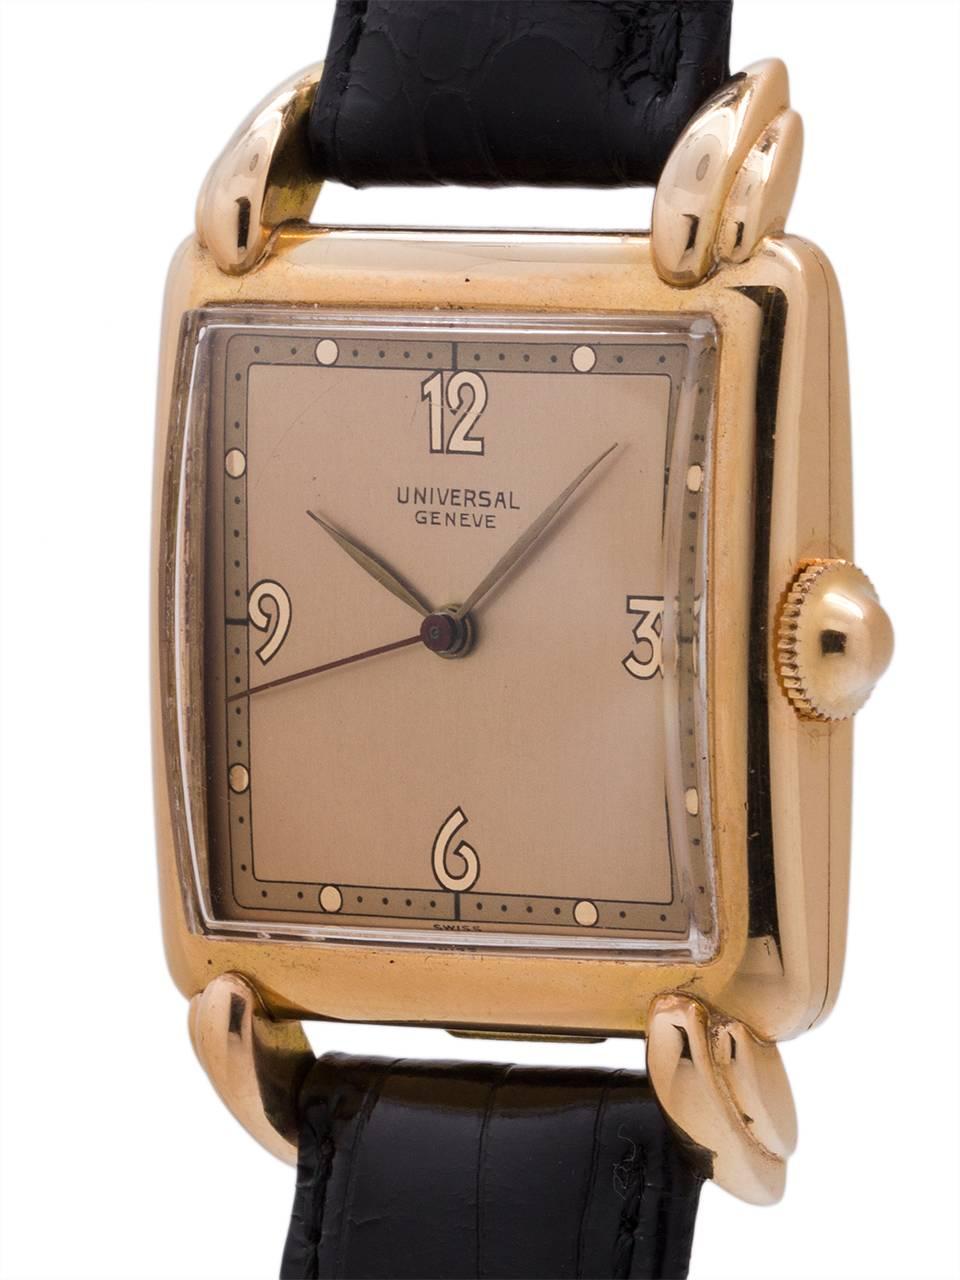 A great looking Universal Geneve 18K PG oversize 30 X 42 dress model circa 1950’s. Large for the era, and highly stylized design with domed case and prominent articulated lugs. With very pleasing restored 2 tone antique salmon dial with mirror pink